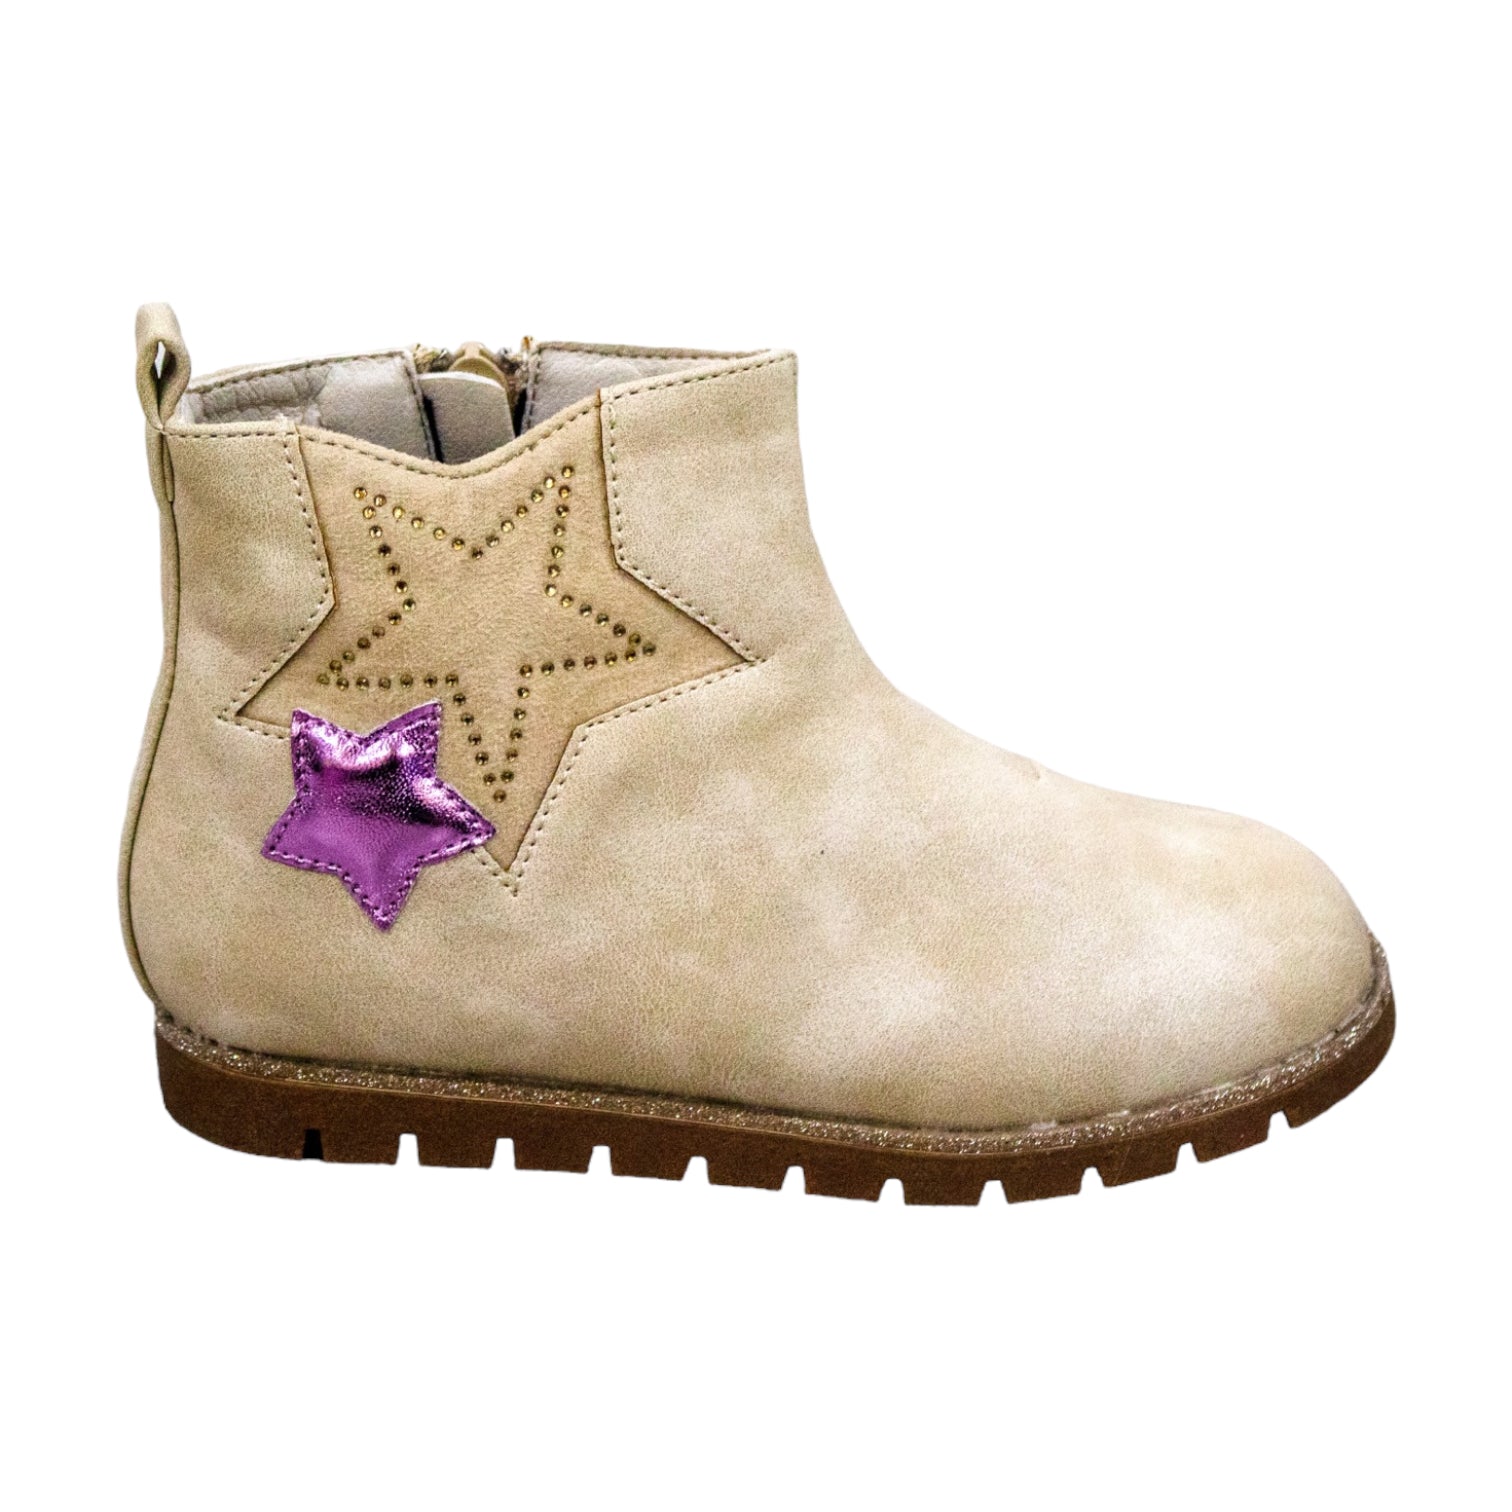 Beige girls ankle boot with star detailed solange